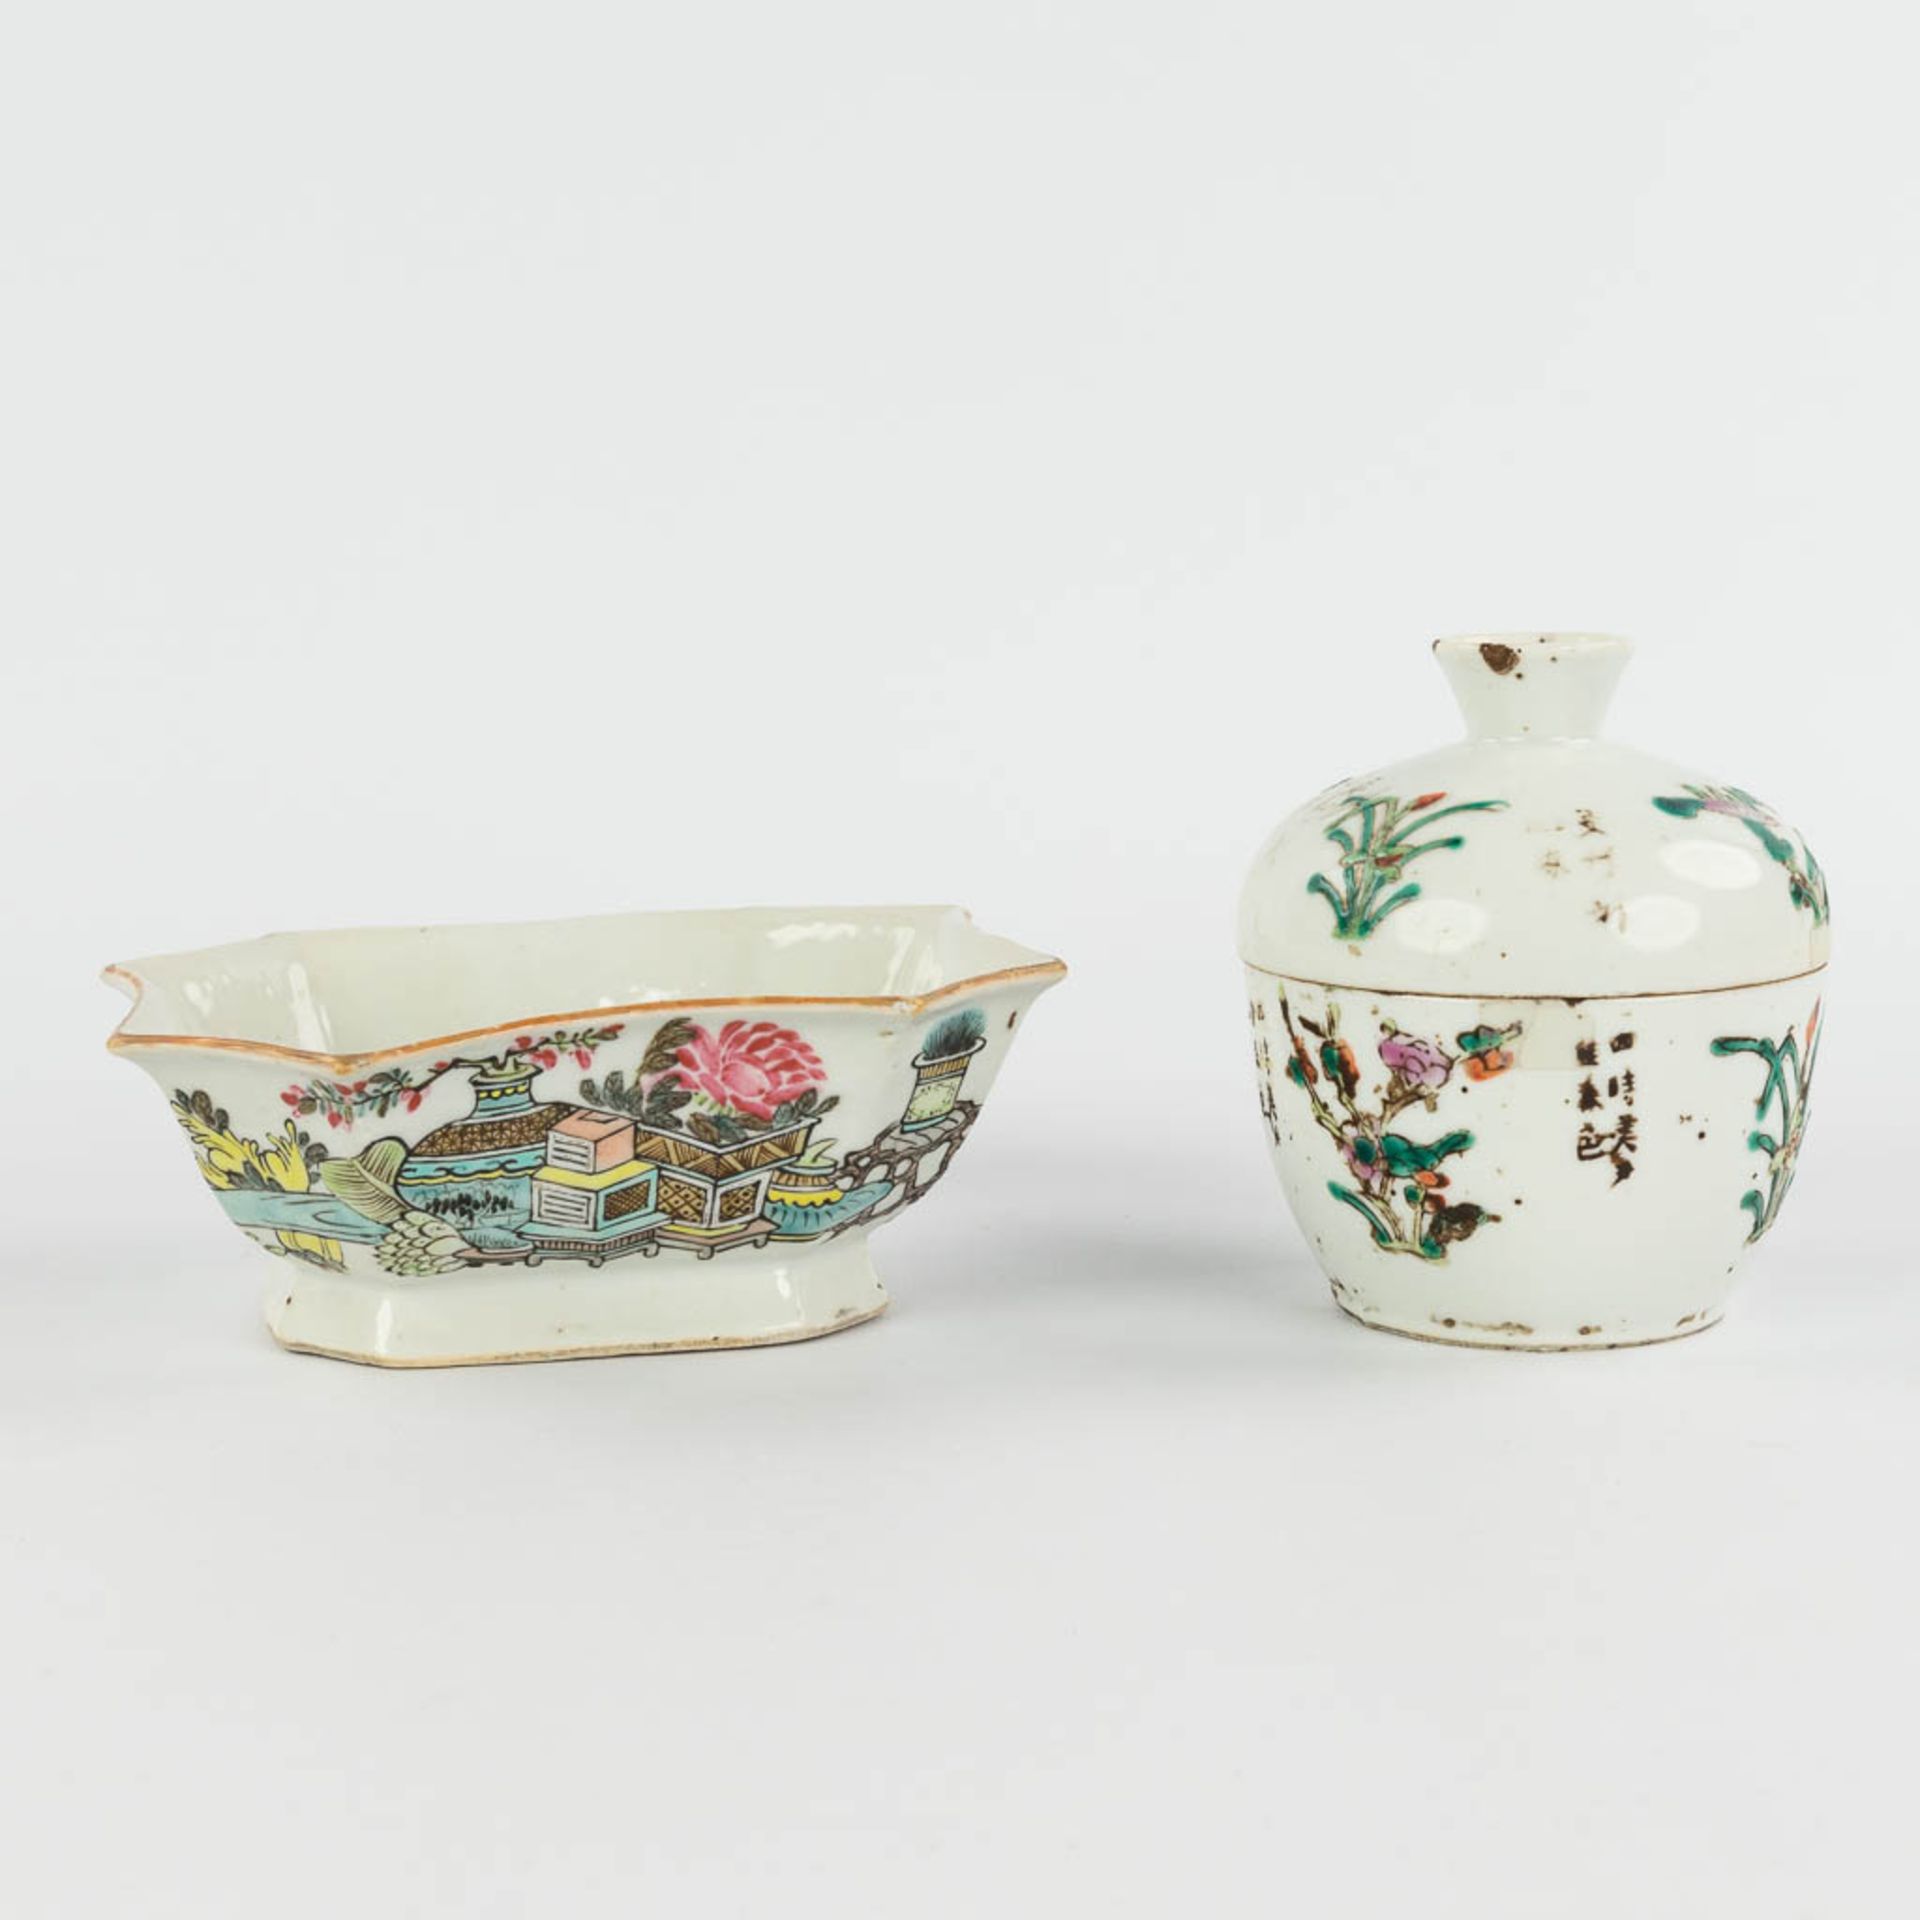 A Chinese bowl and small pot with a lid. Guangxu and Tongzi mark. 19th/20th C. (L:13,5 x W:16,5 x H: